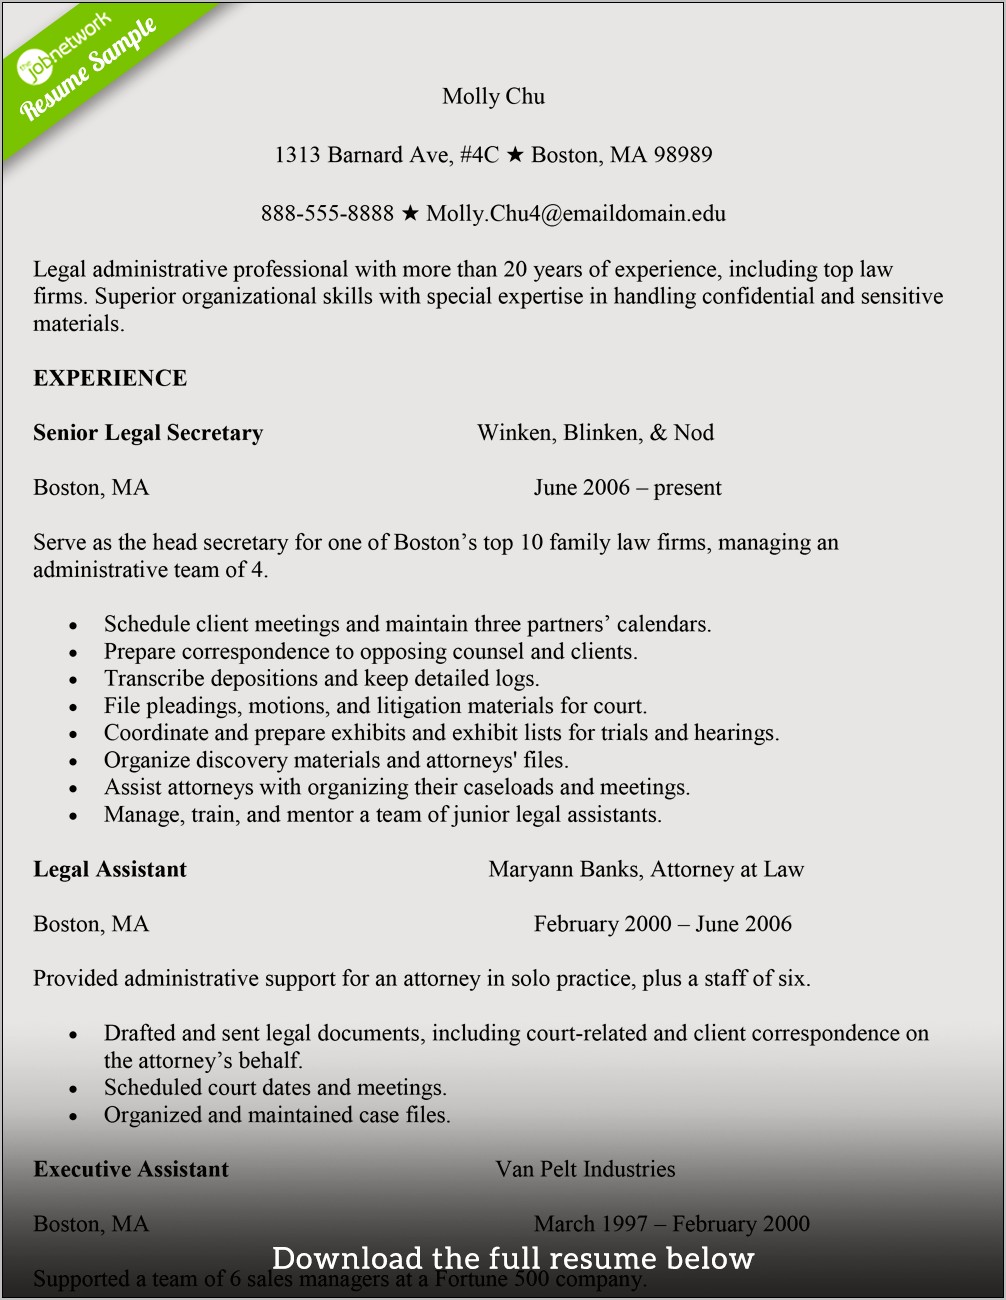 Objective On A Resume Examples For Secretary